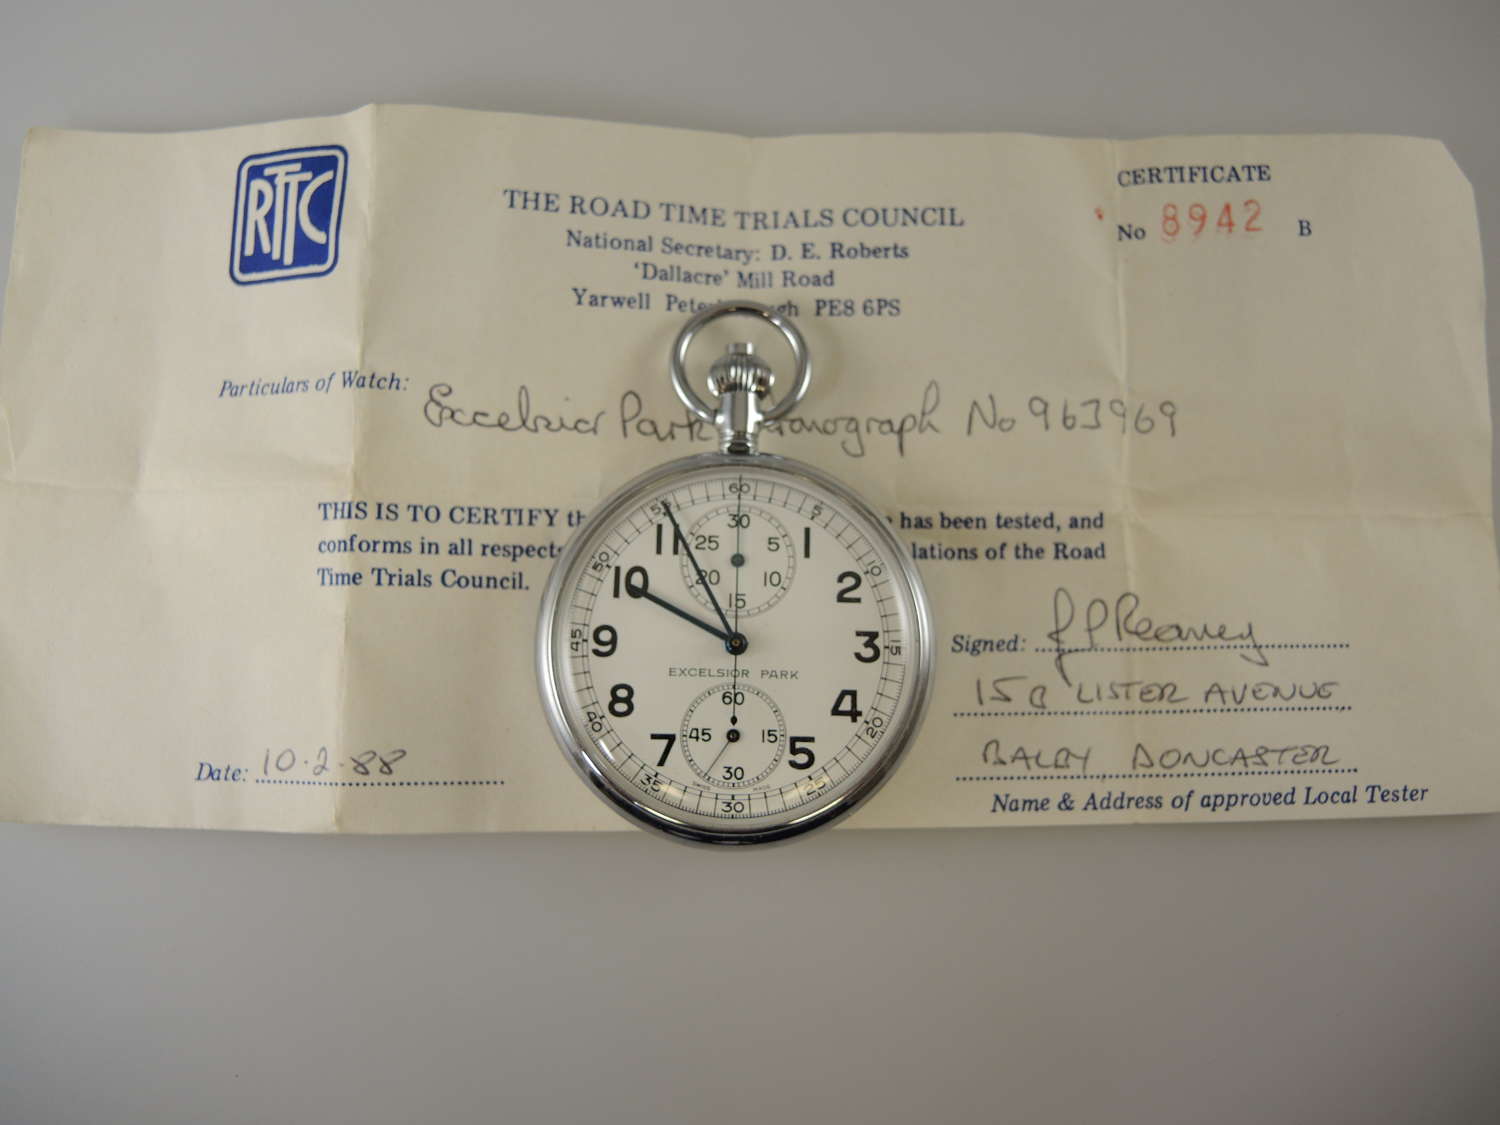 Swiss chronograph pocket watch with Time Trials Certificate c1950